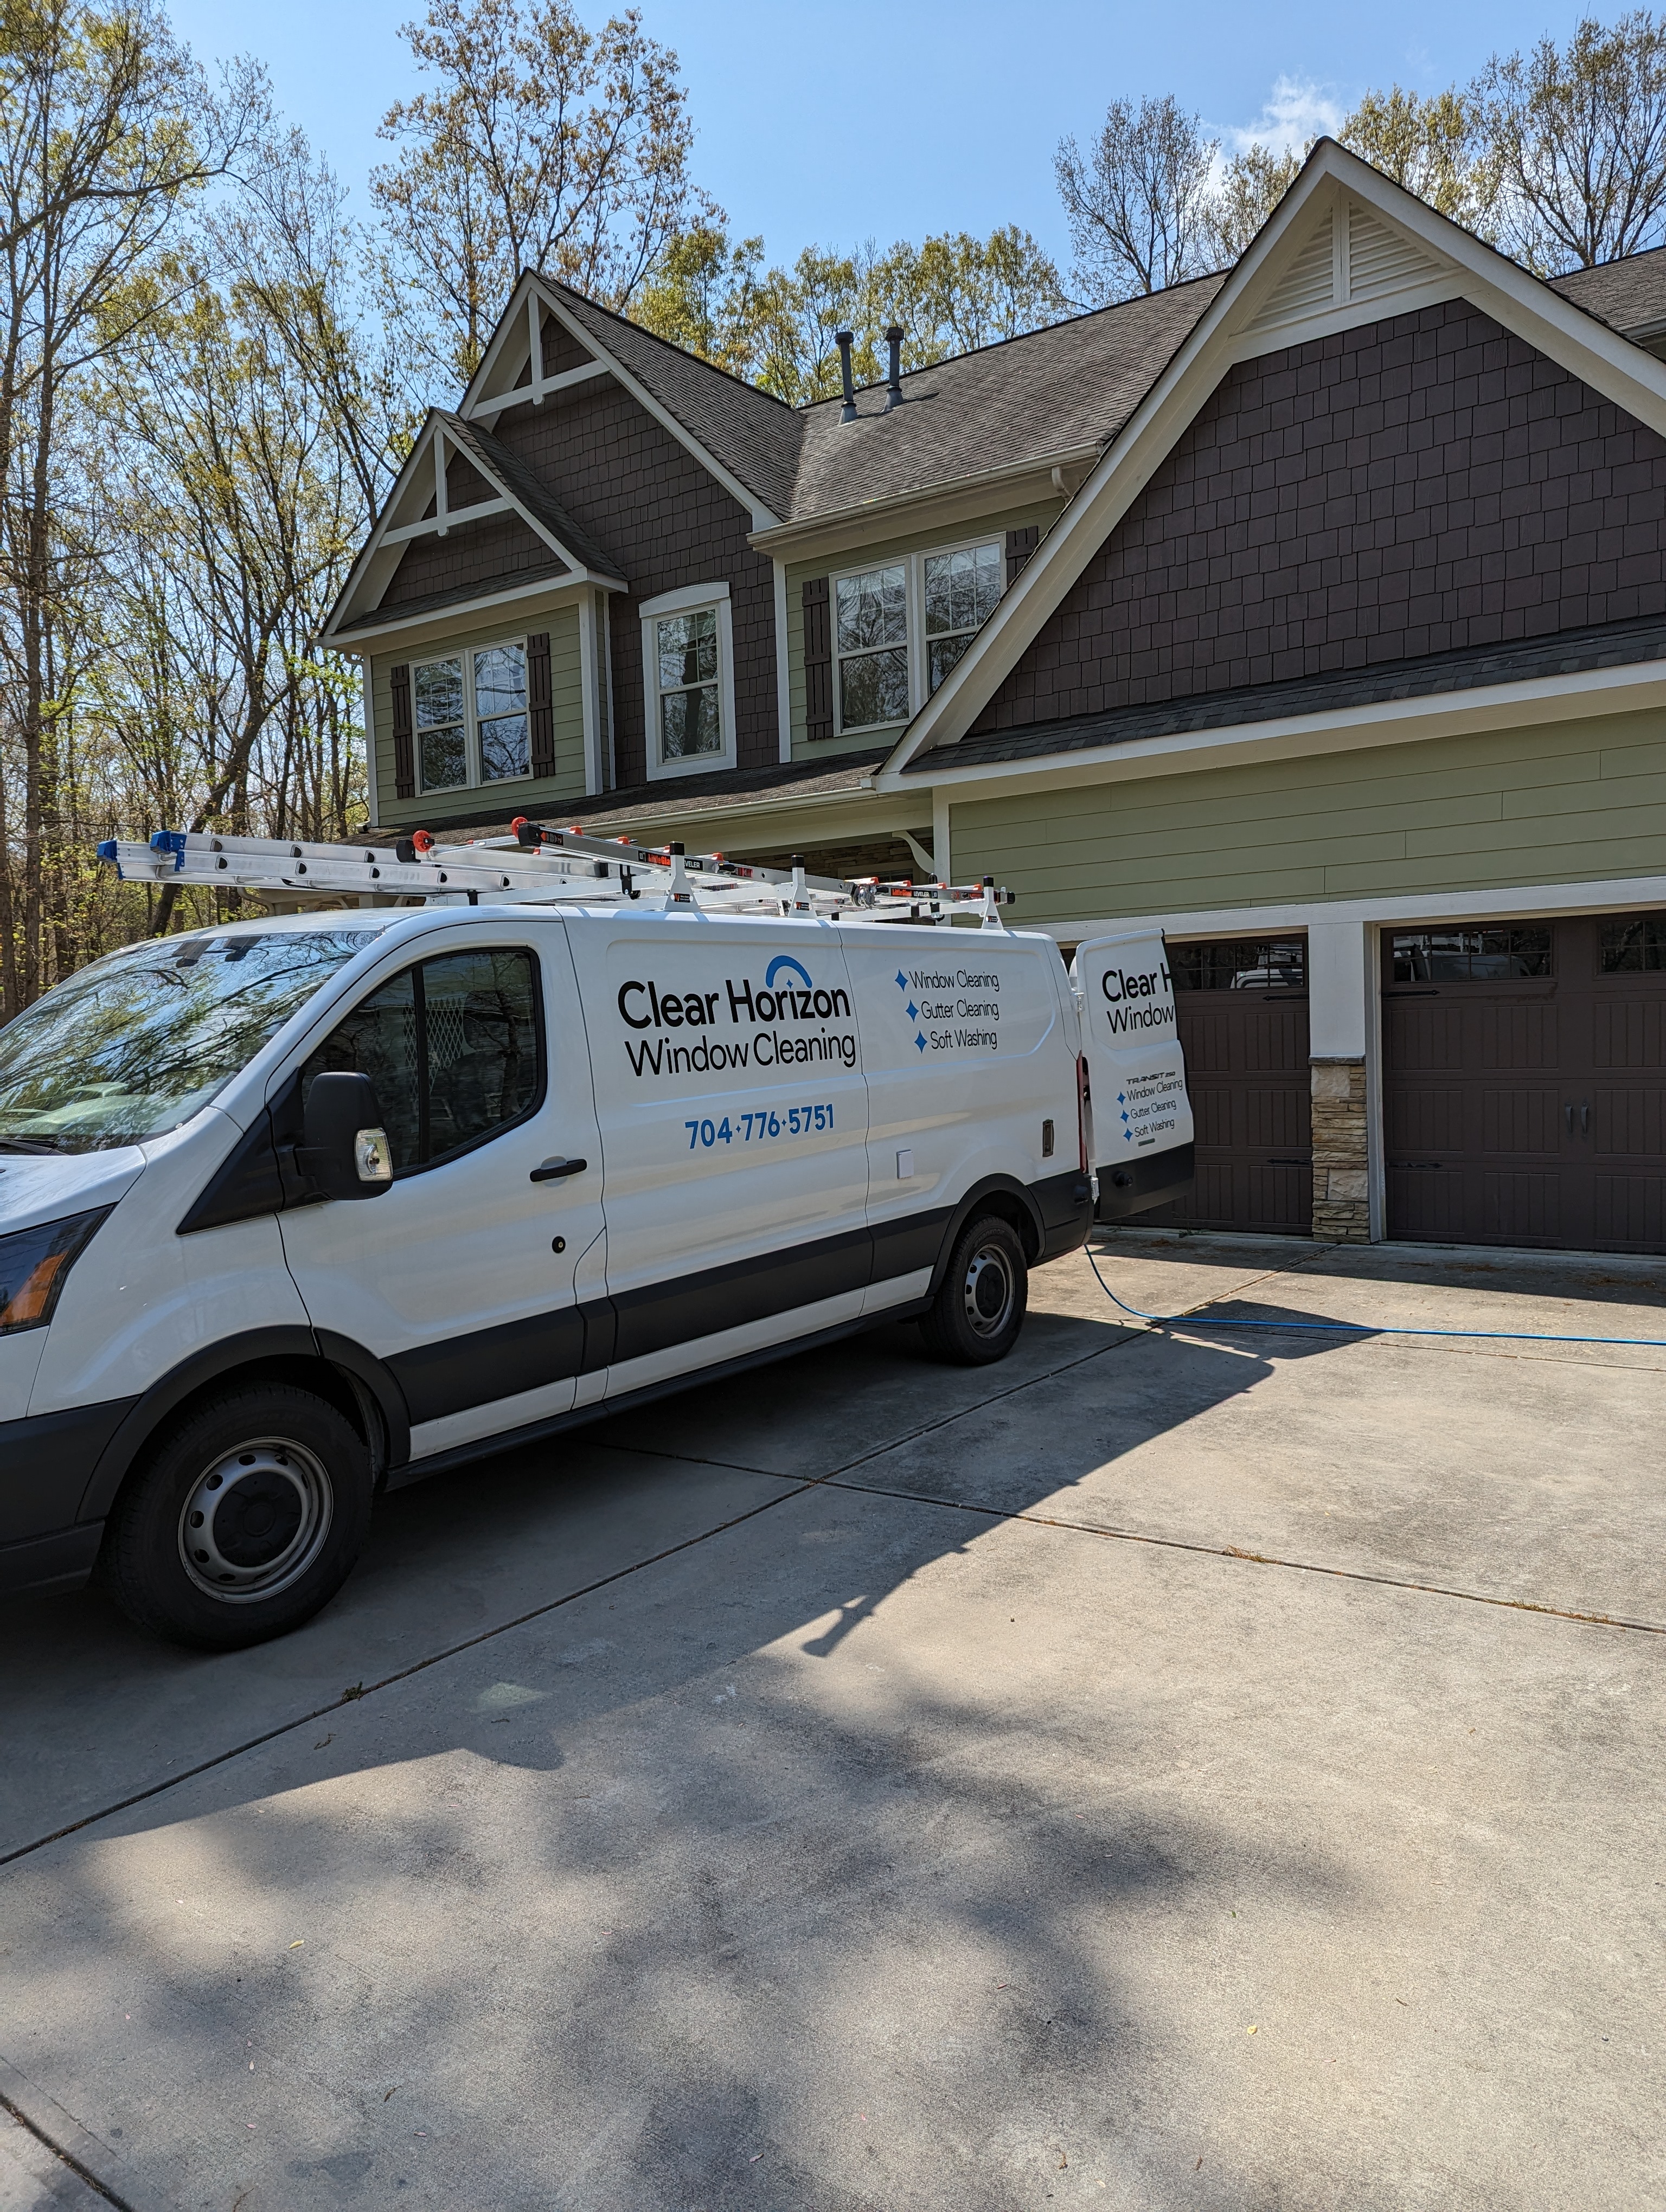 Phenomenal Quality Window Cleaning Service In Waxhaw, NC